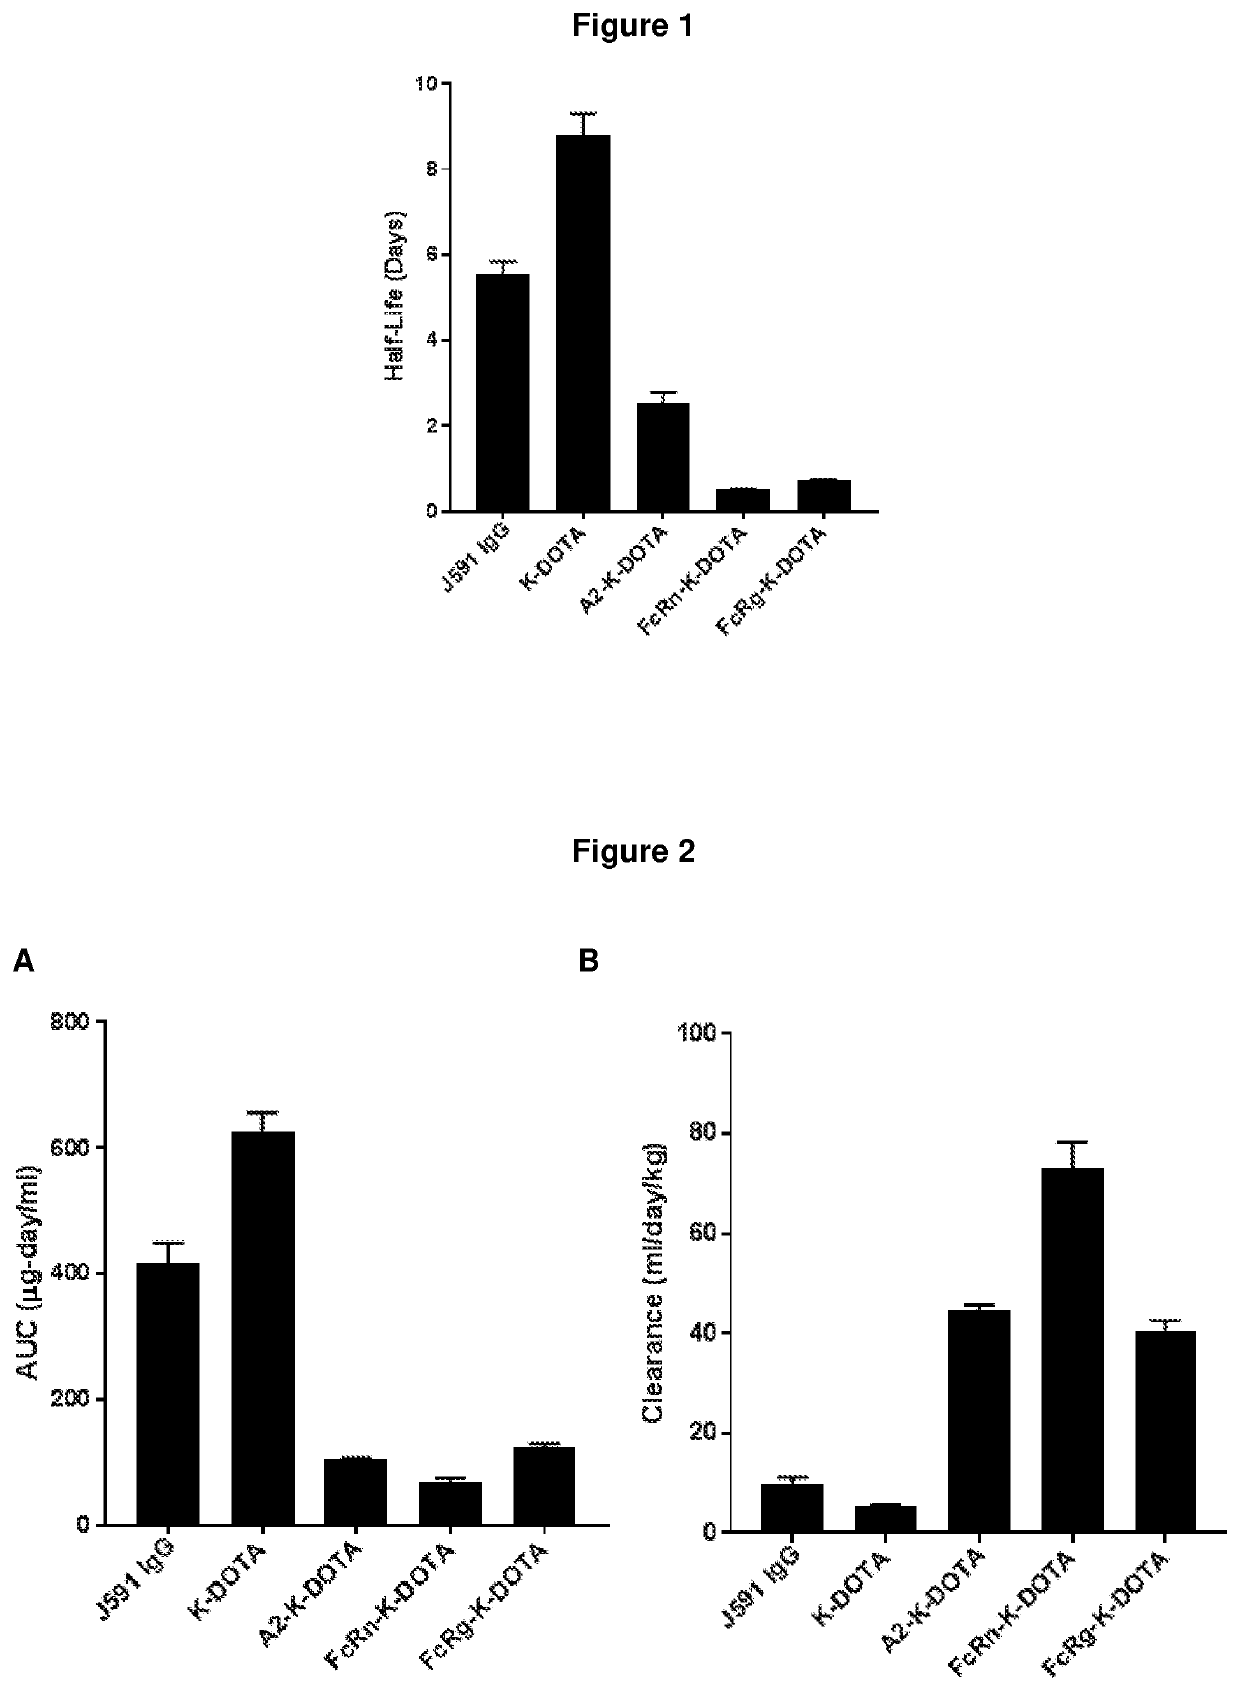 Antibodies for binding psma with reduced affinity for the neonatal fc receptor